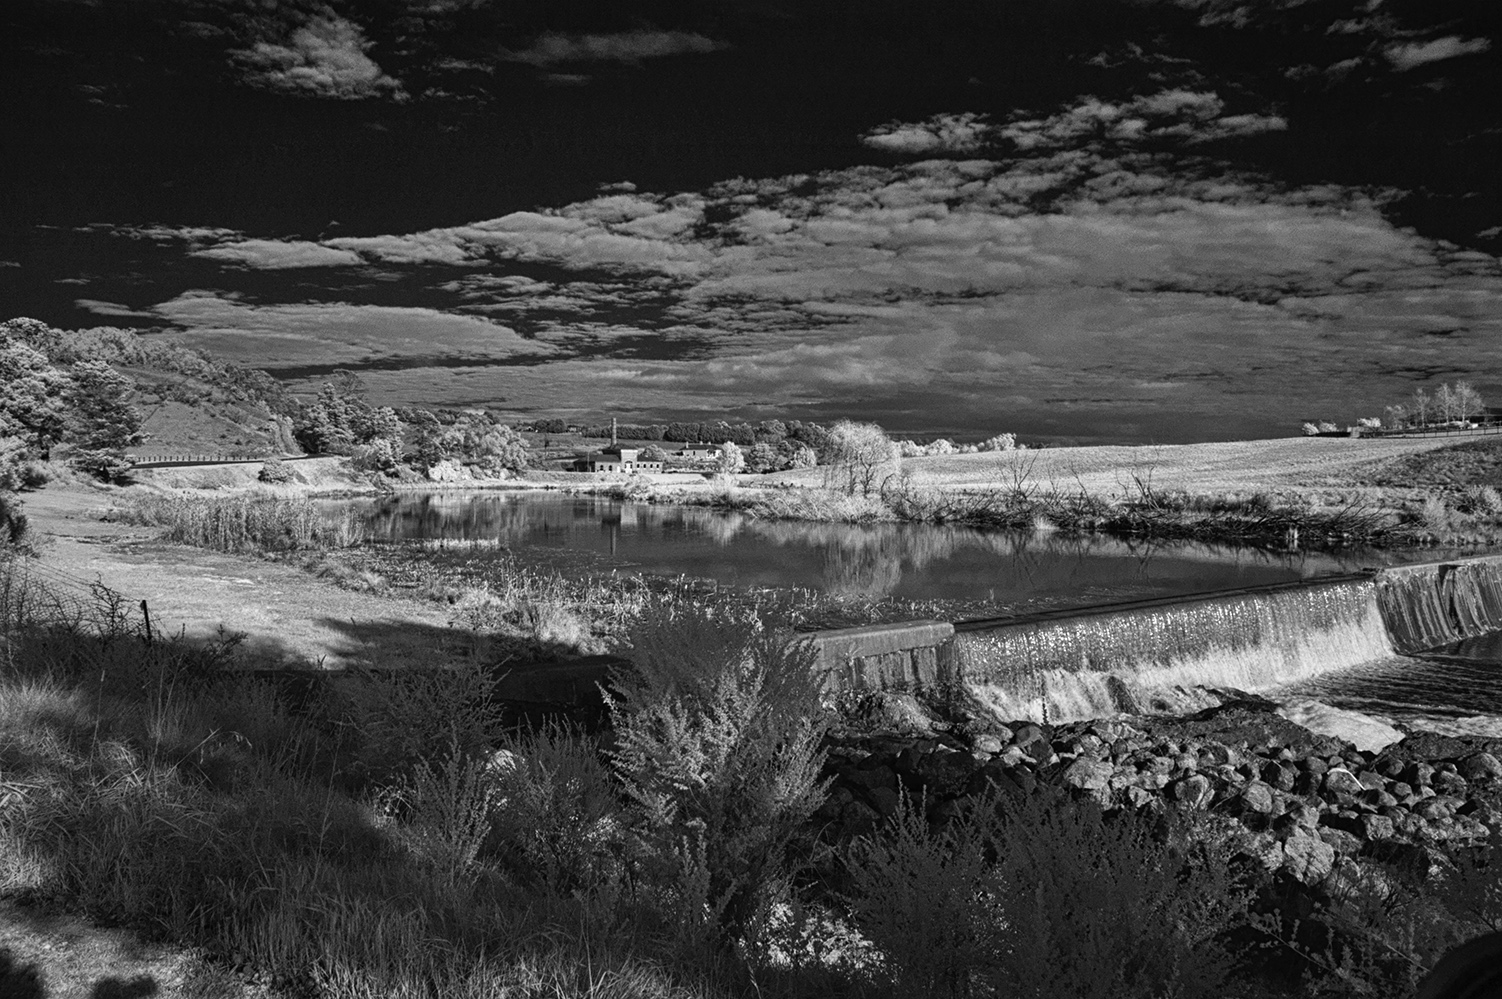 INFRA RED IMAGE OF THE WOLLONDILLY RIVER OVERFLOWING THE MARSDEN WEIR- UPLOADED 1/4/15